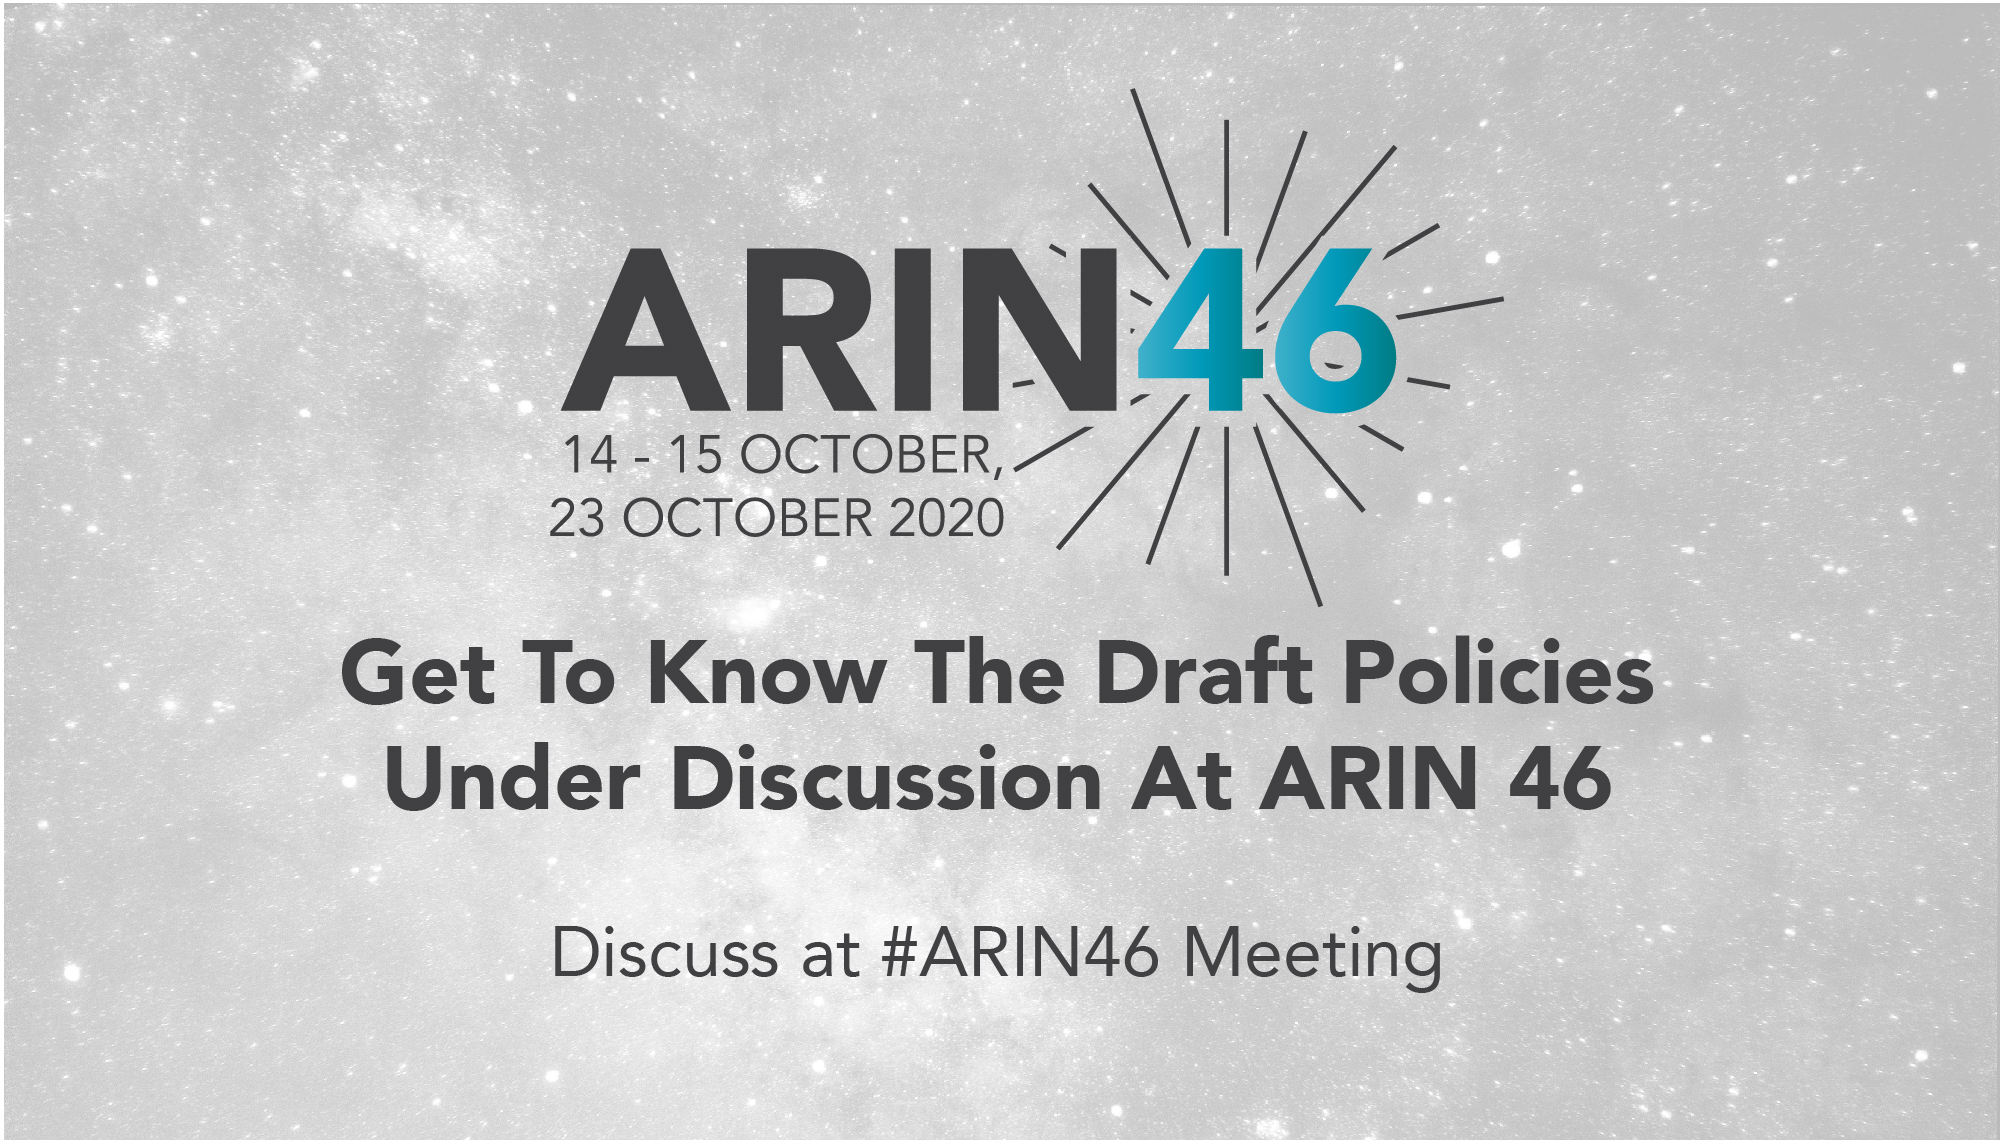 Get to Know the Draft Policies Under Discussion At ARIN 46